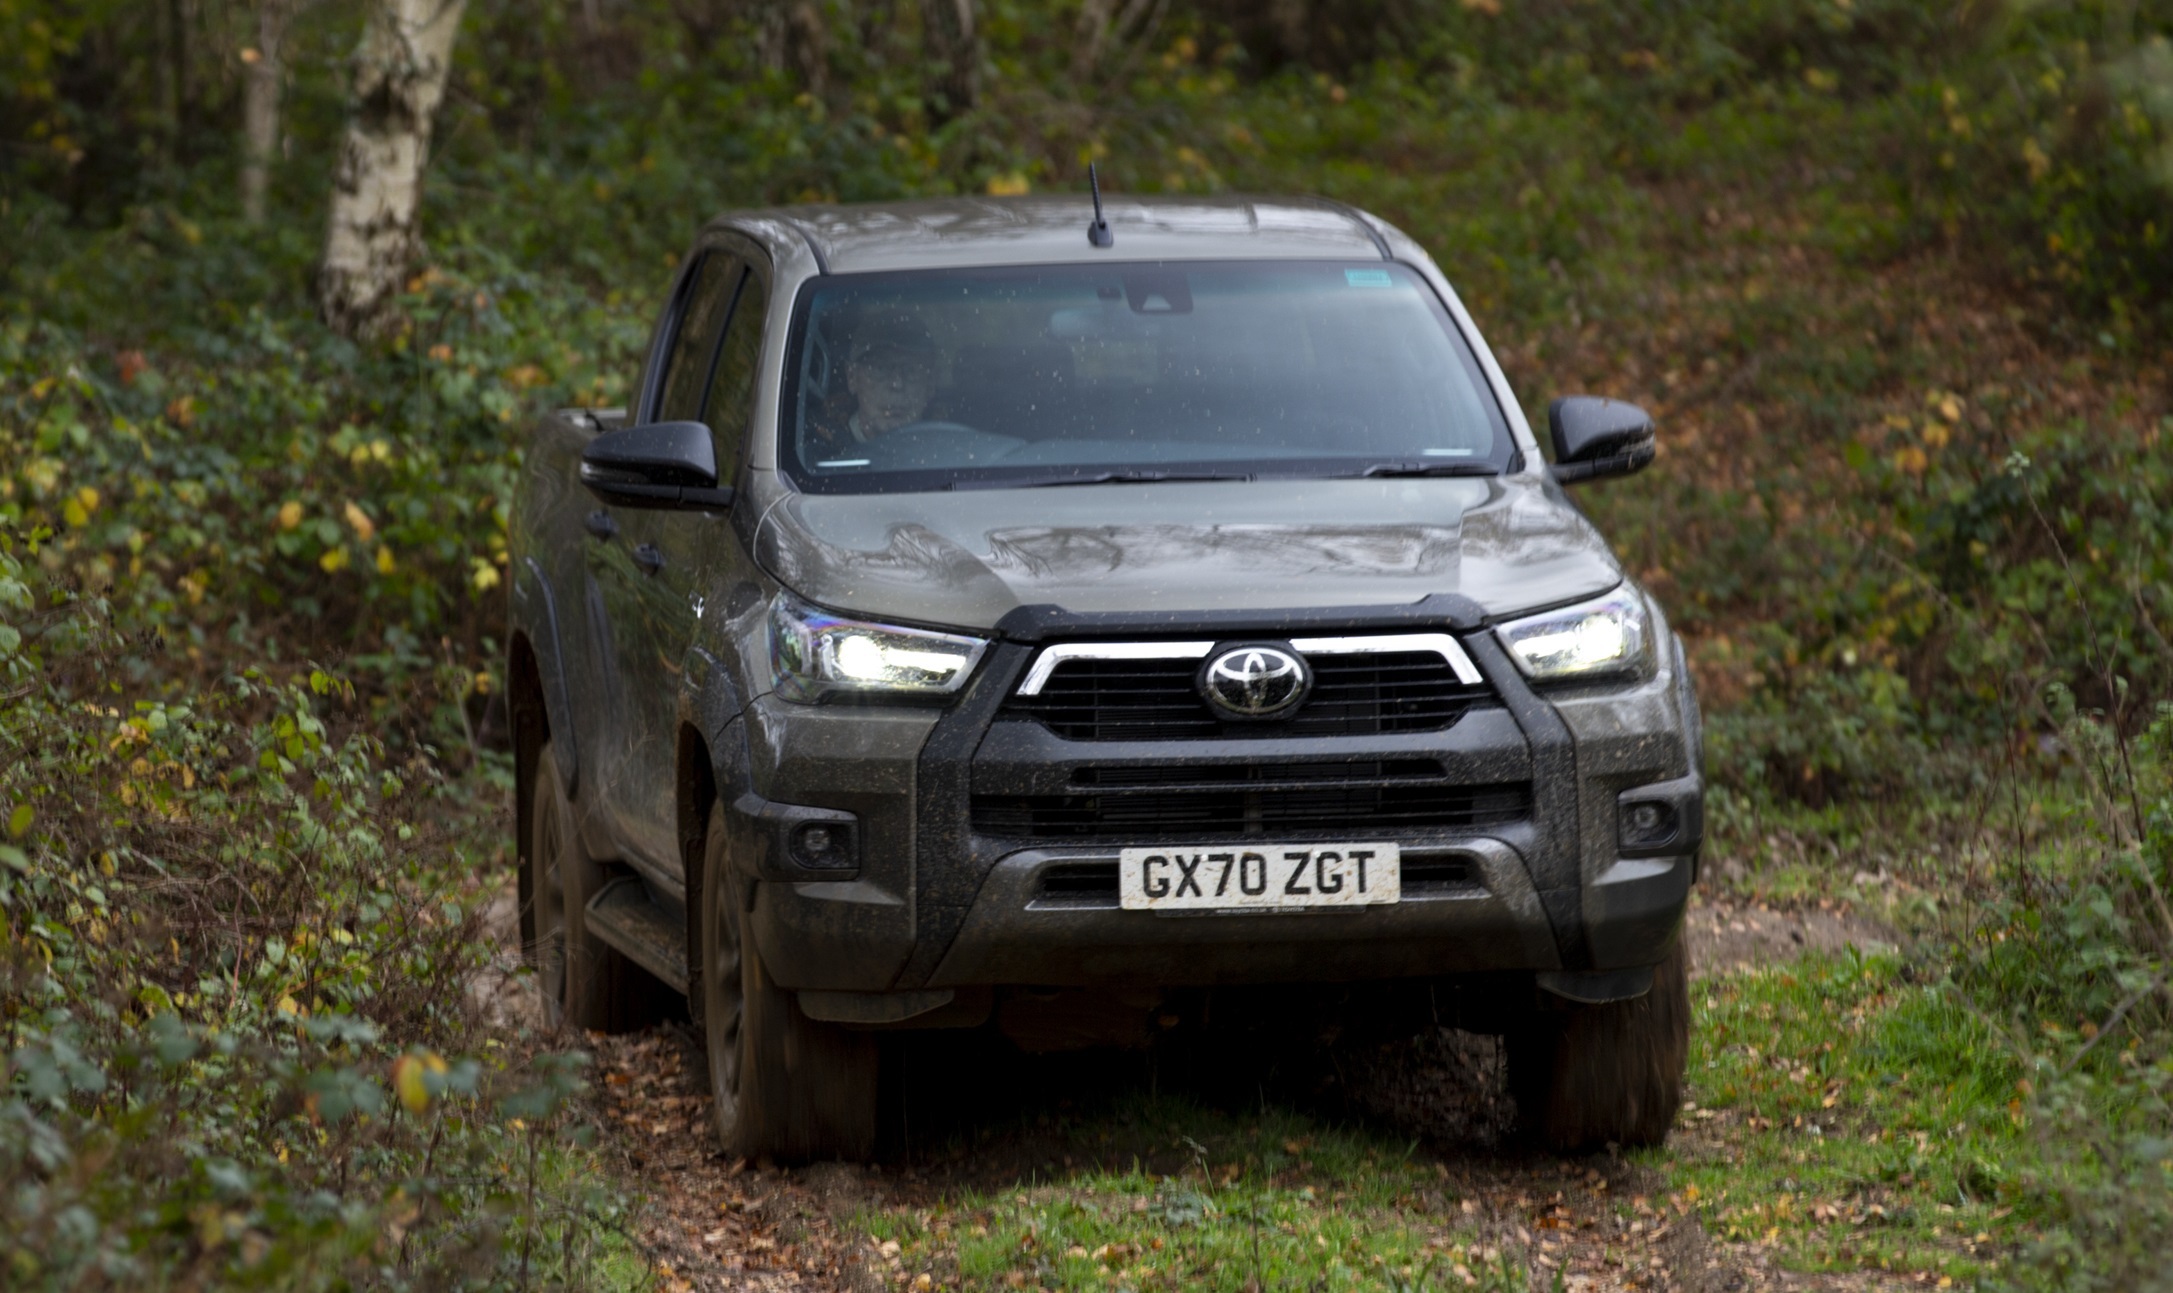 The new Toyota Hilux 2.8 Double Cab 